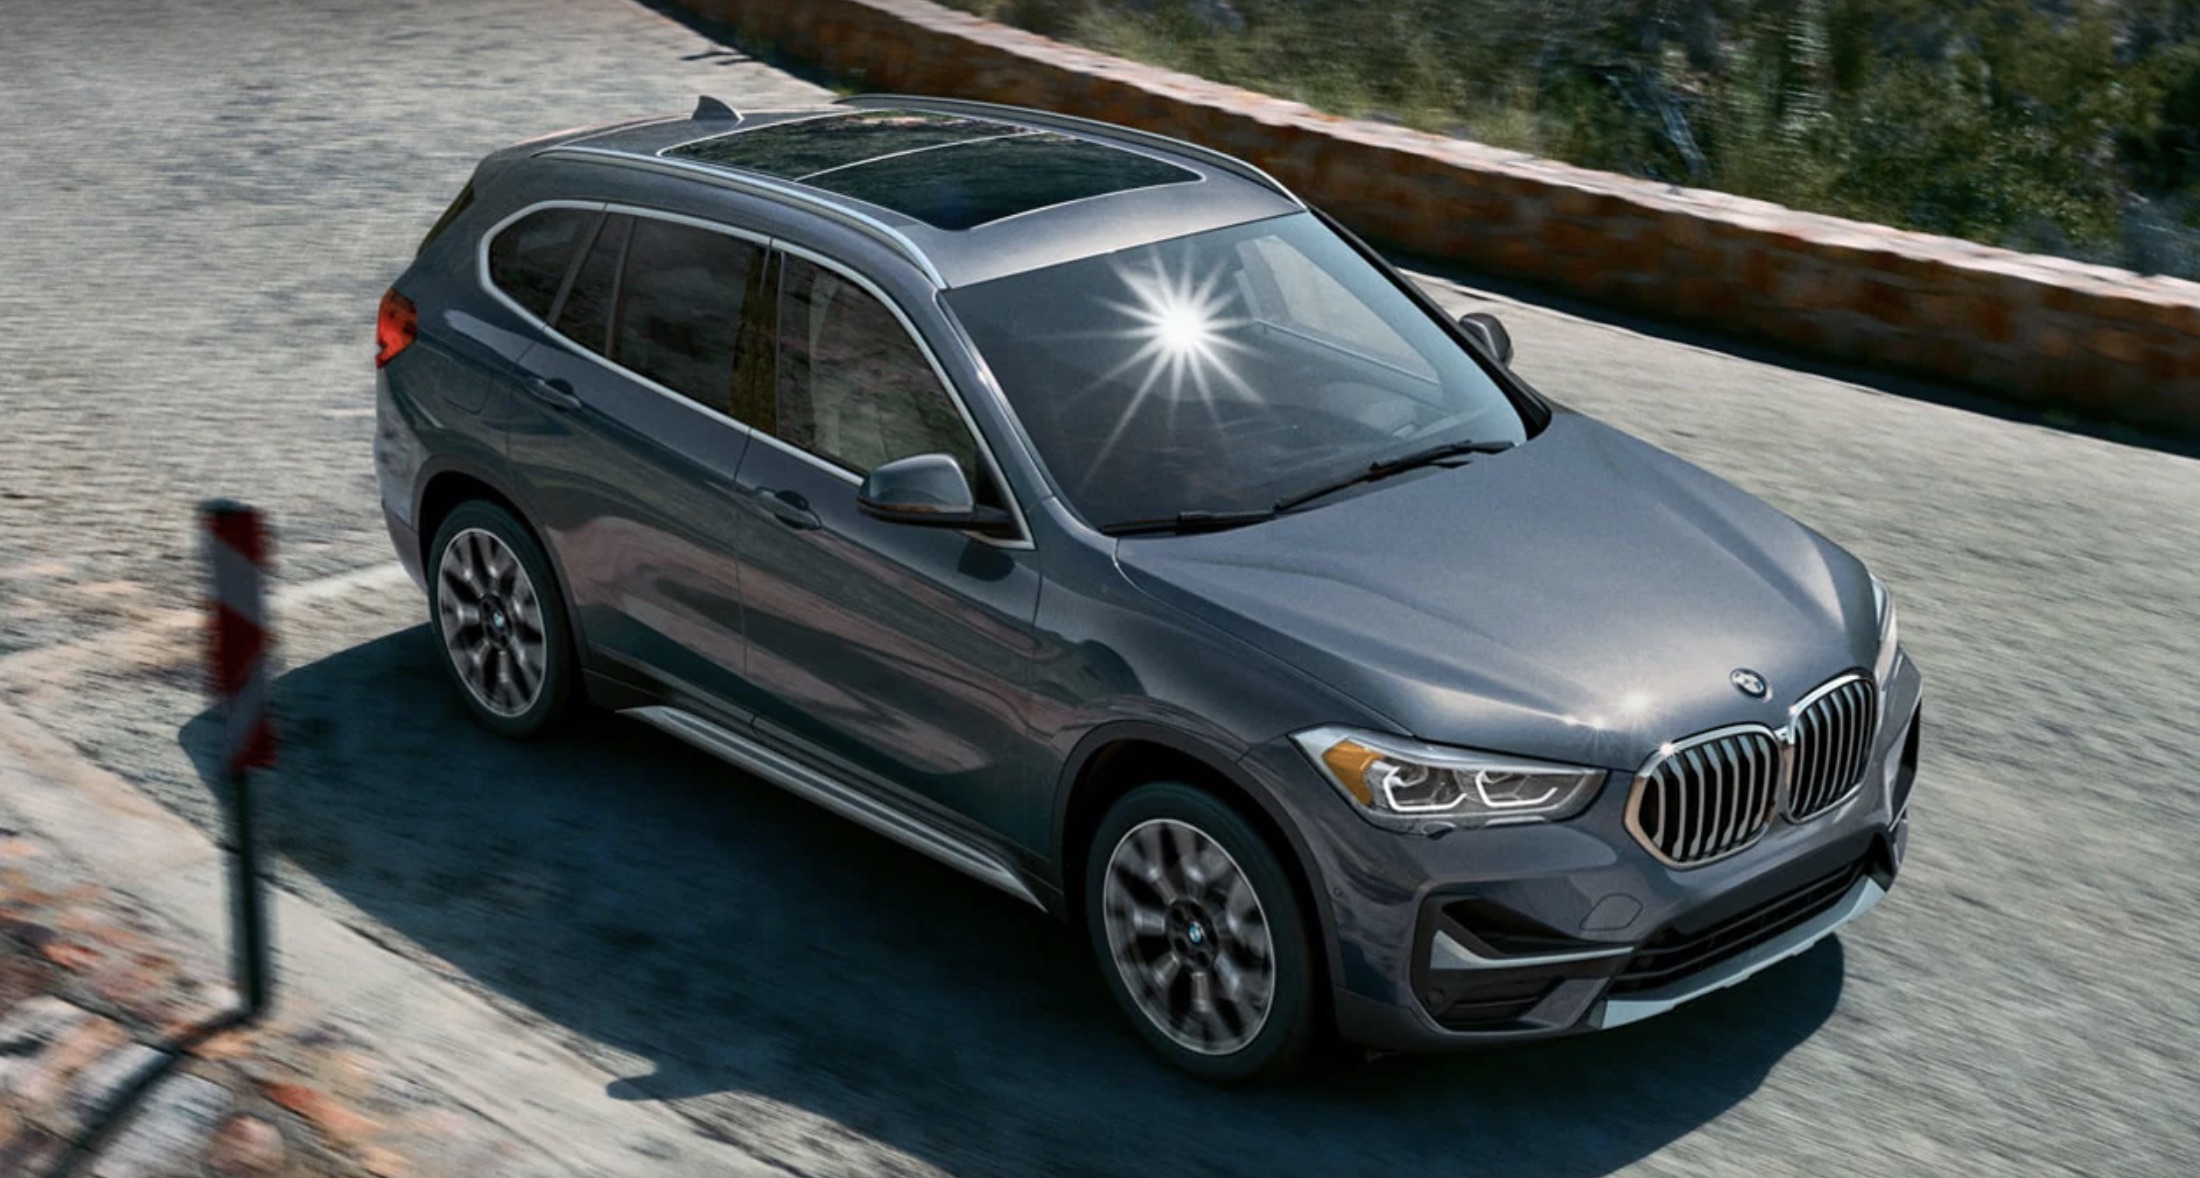 2022 BMW X1 in gray driving down the road at a high speed.